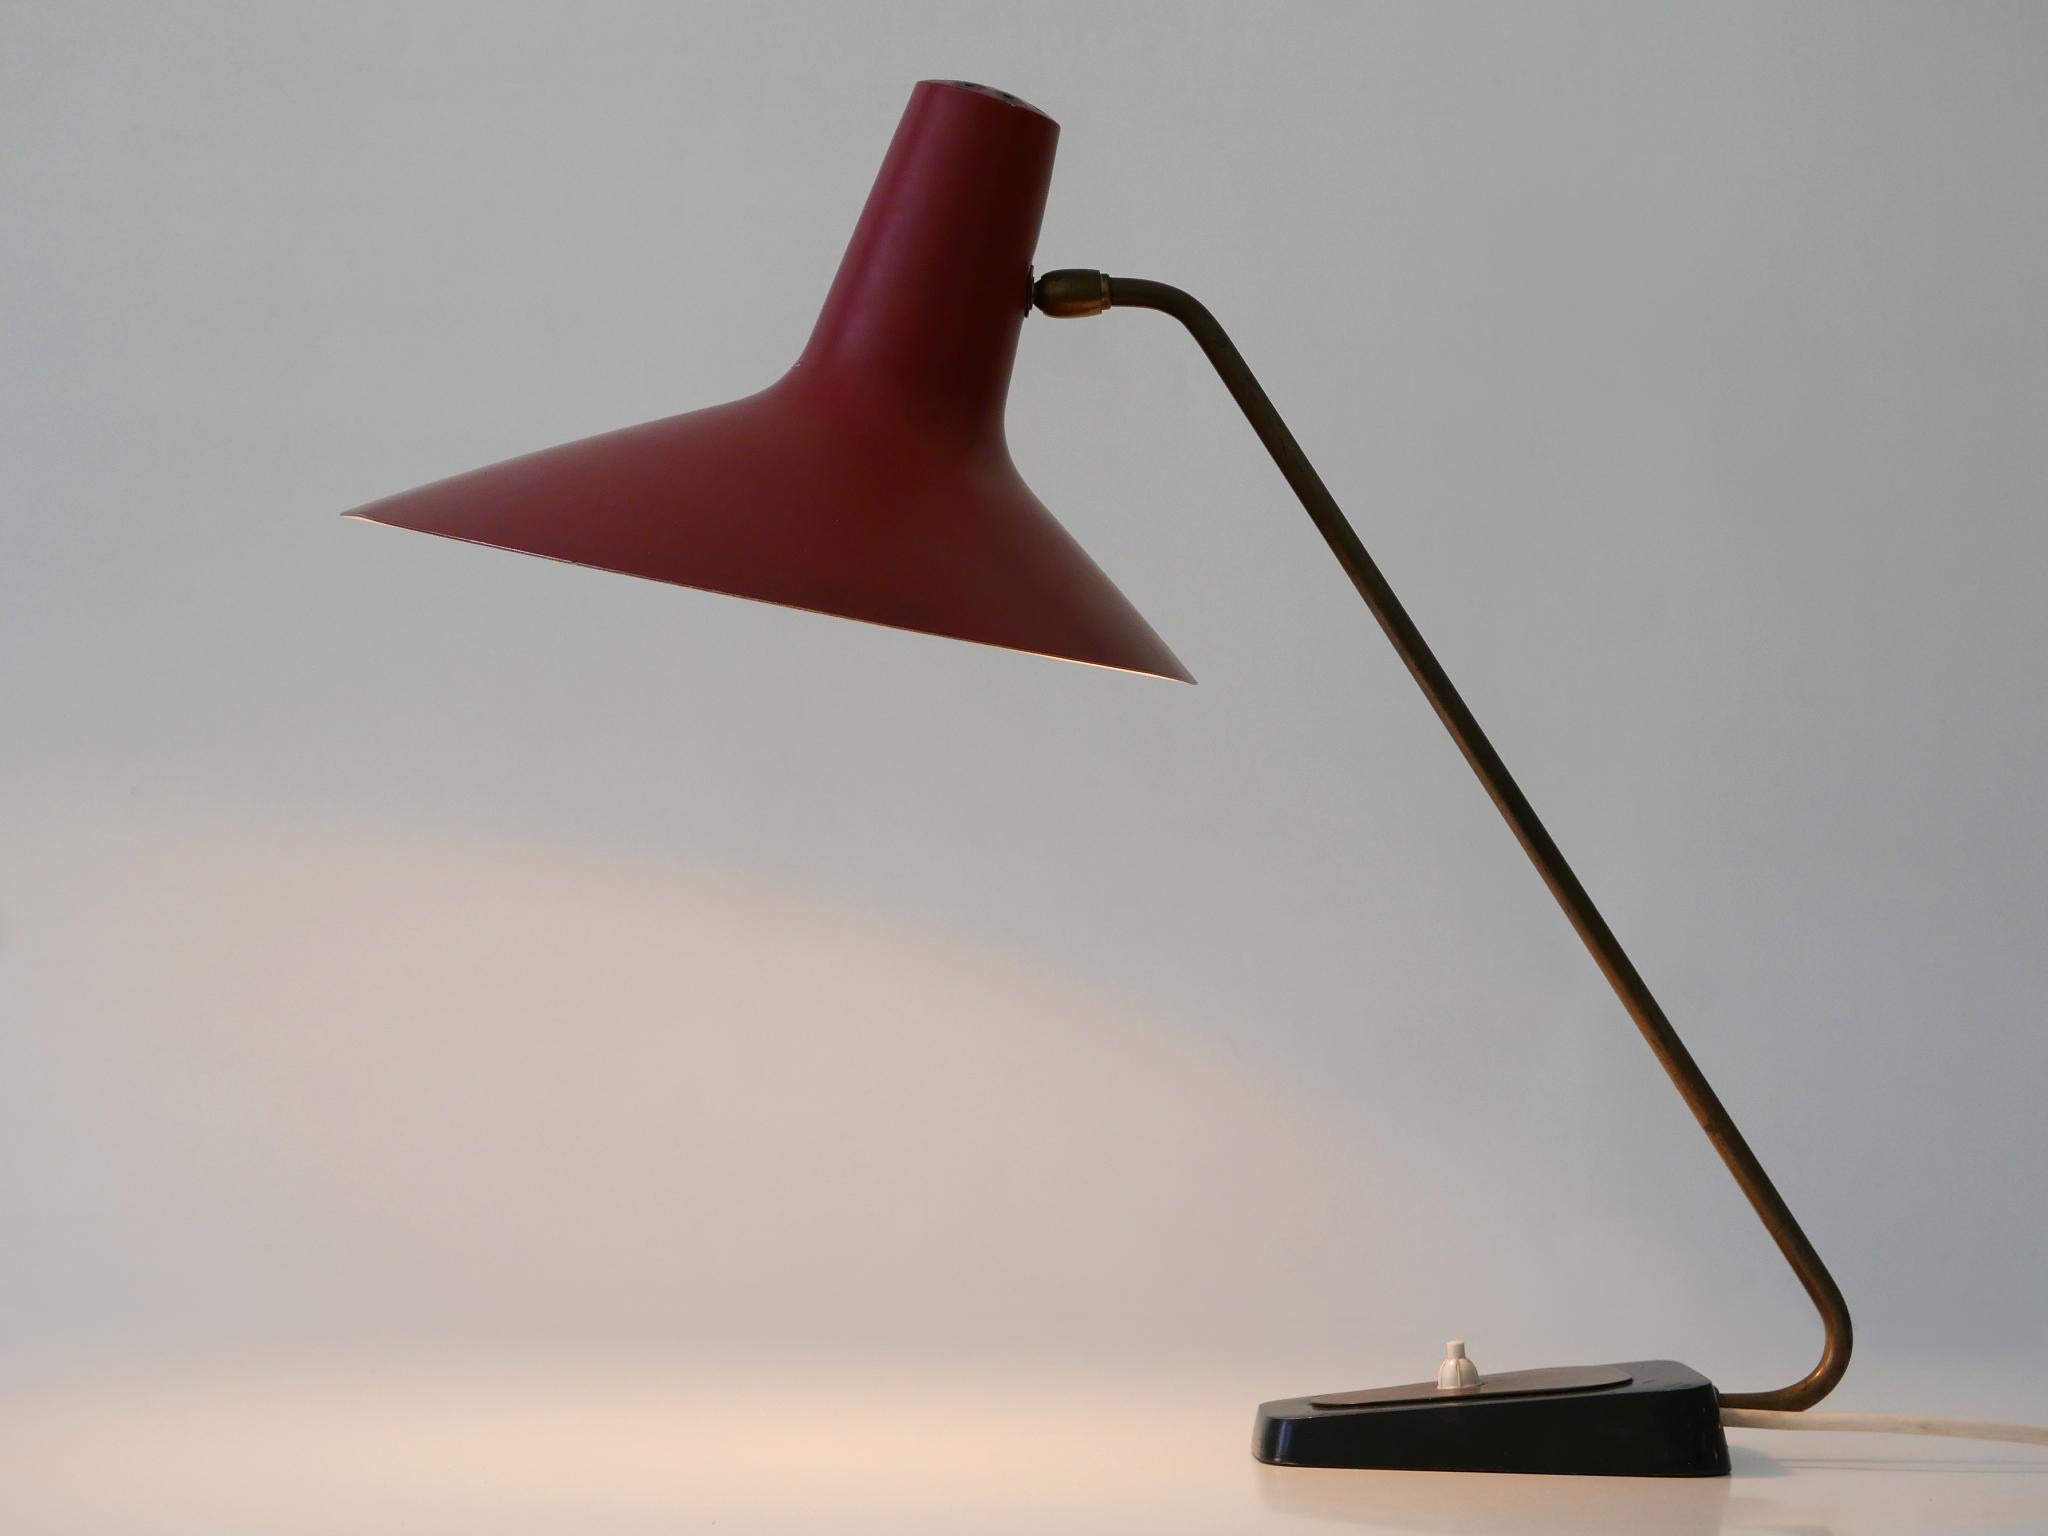 Exceptional Mid-Century Modern Table Lamp by Gebrüder Cosack Germany 1950s For Sale 8